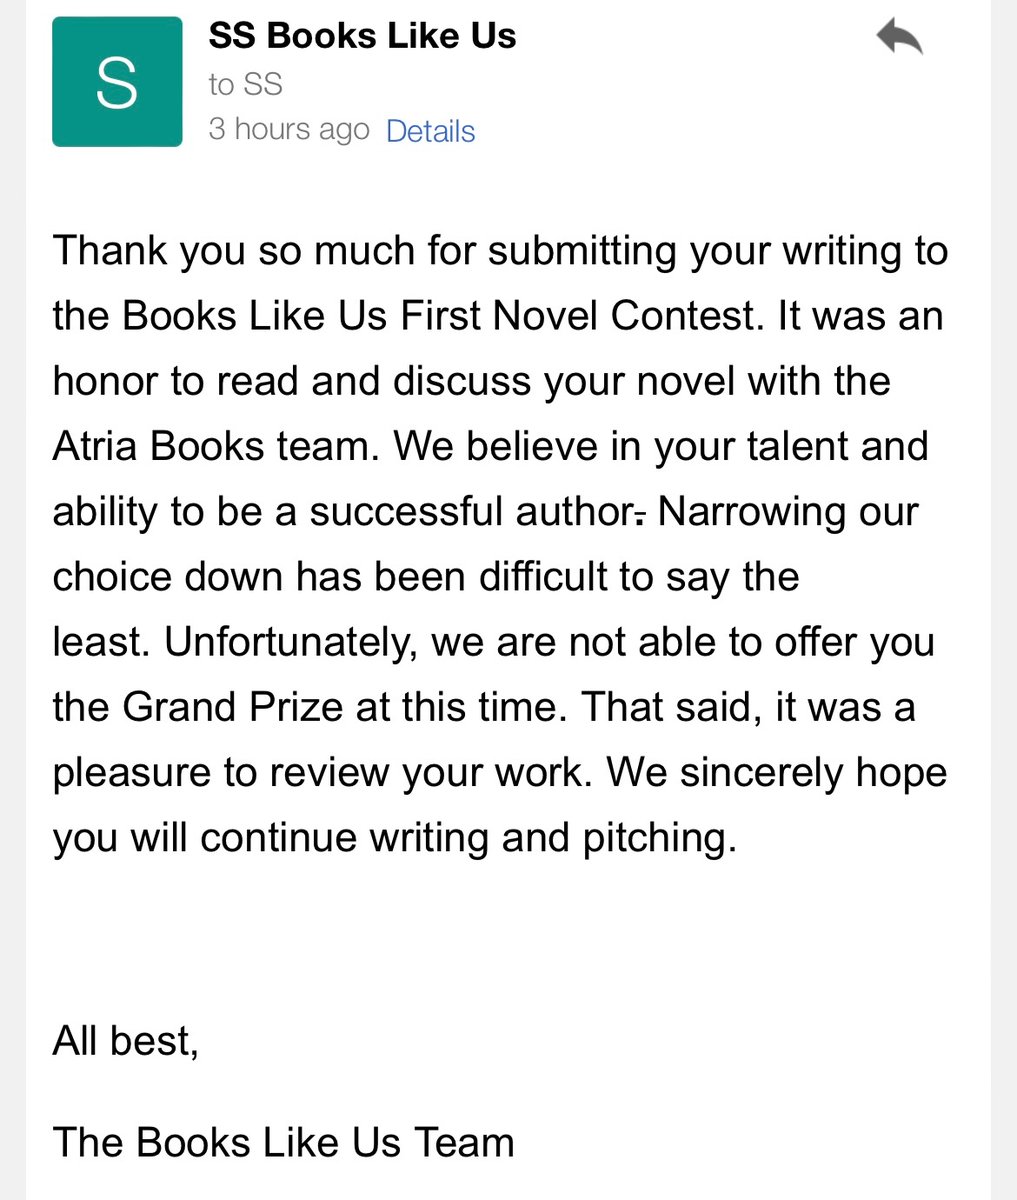 Oh, sadness. I did not win Atria’s “Books Like Us” contest, but was one of 10 semi-finalists. Sometimes it feels like I am so close to writing a sellable book. More often it feels like I am so, so far away